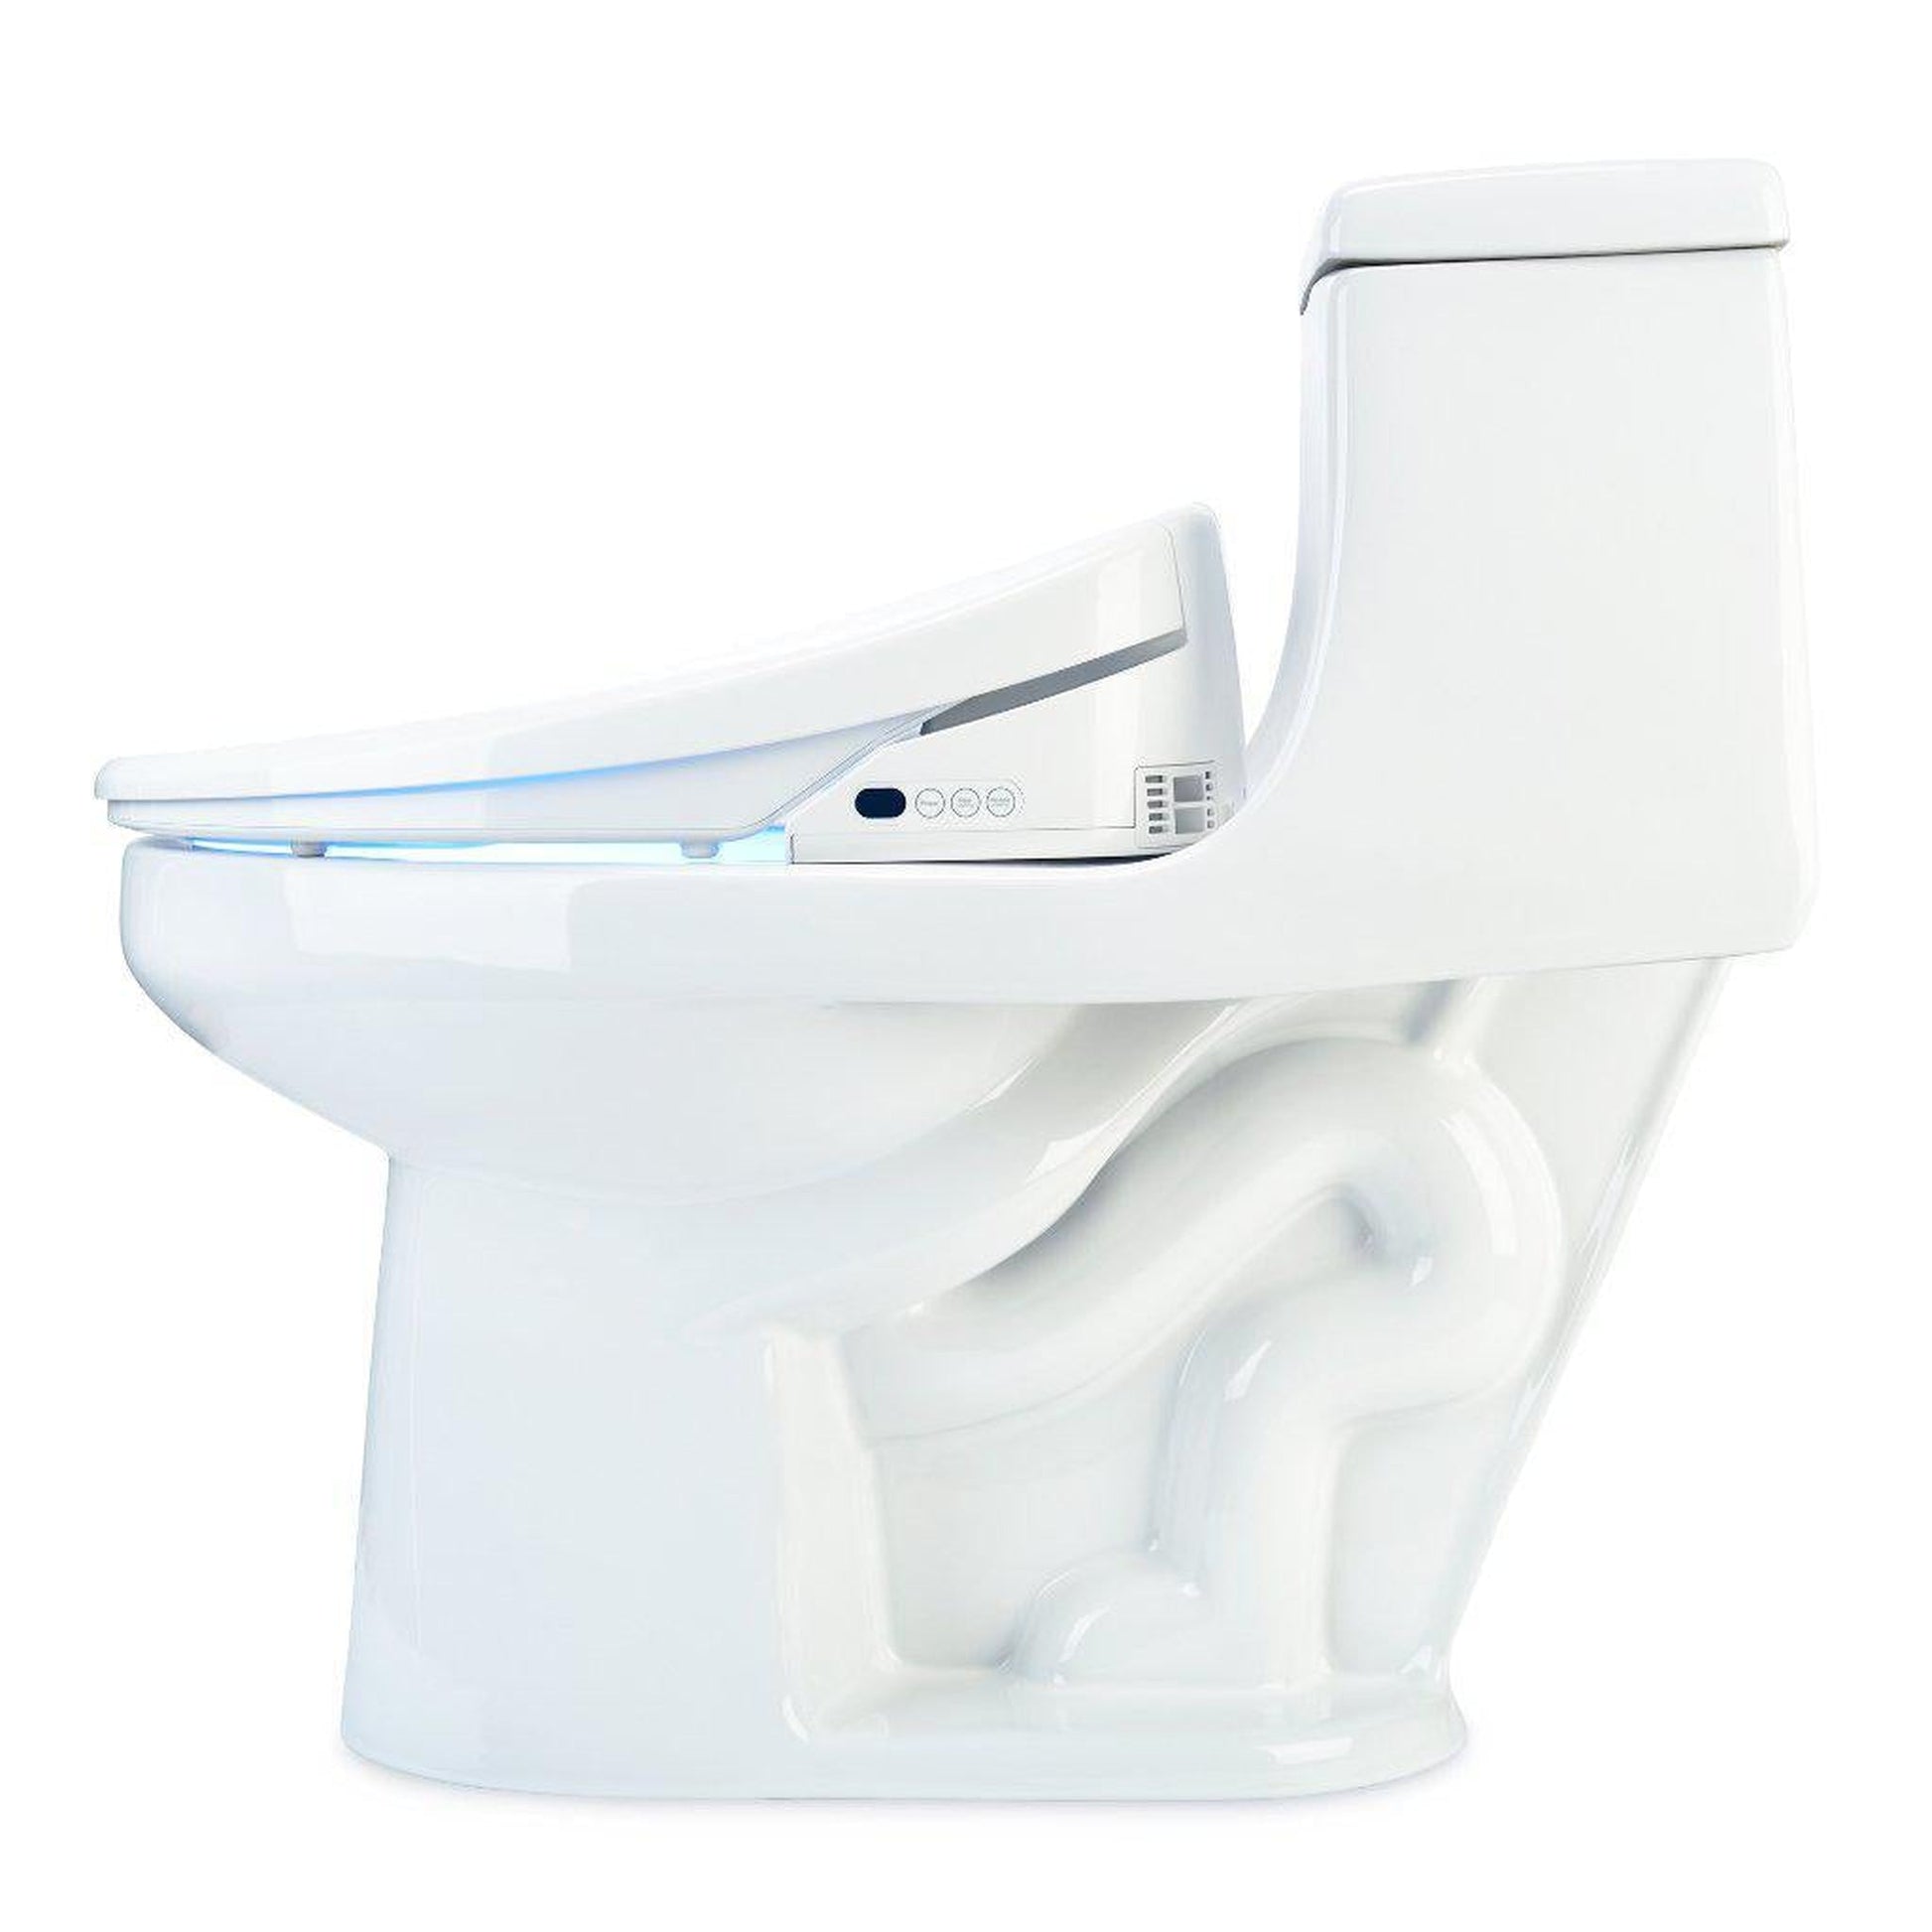 Brondell Swash 1400 20.43" White Elongated Electric Luxury Bidet Toilet Seat With Wireless Remote Control